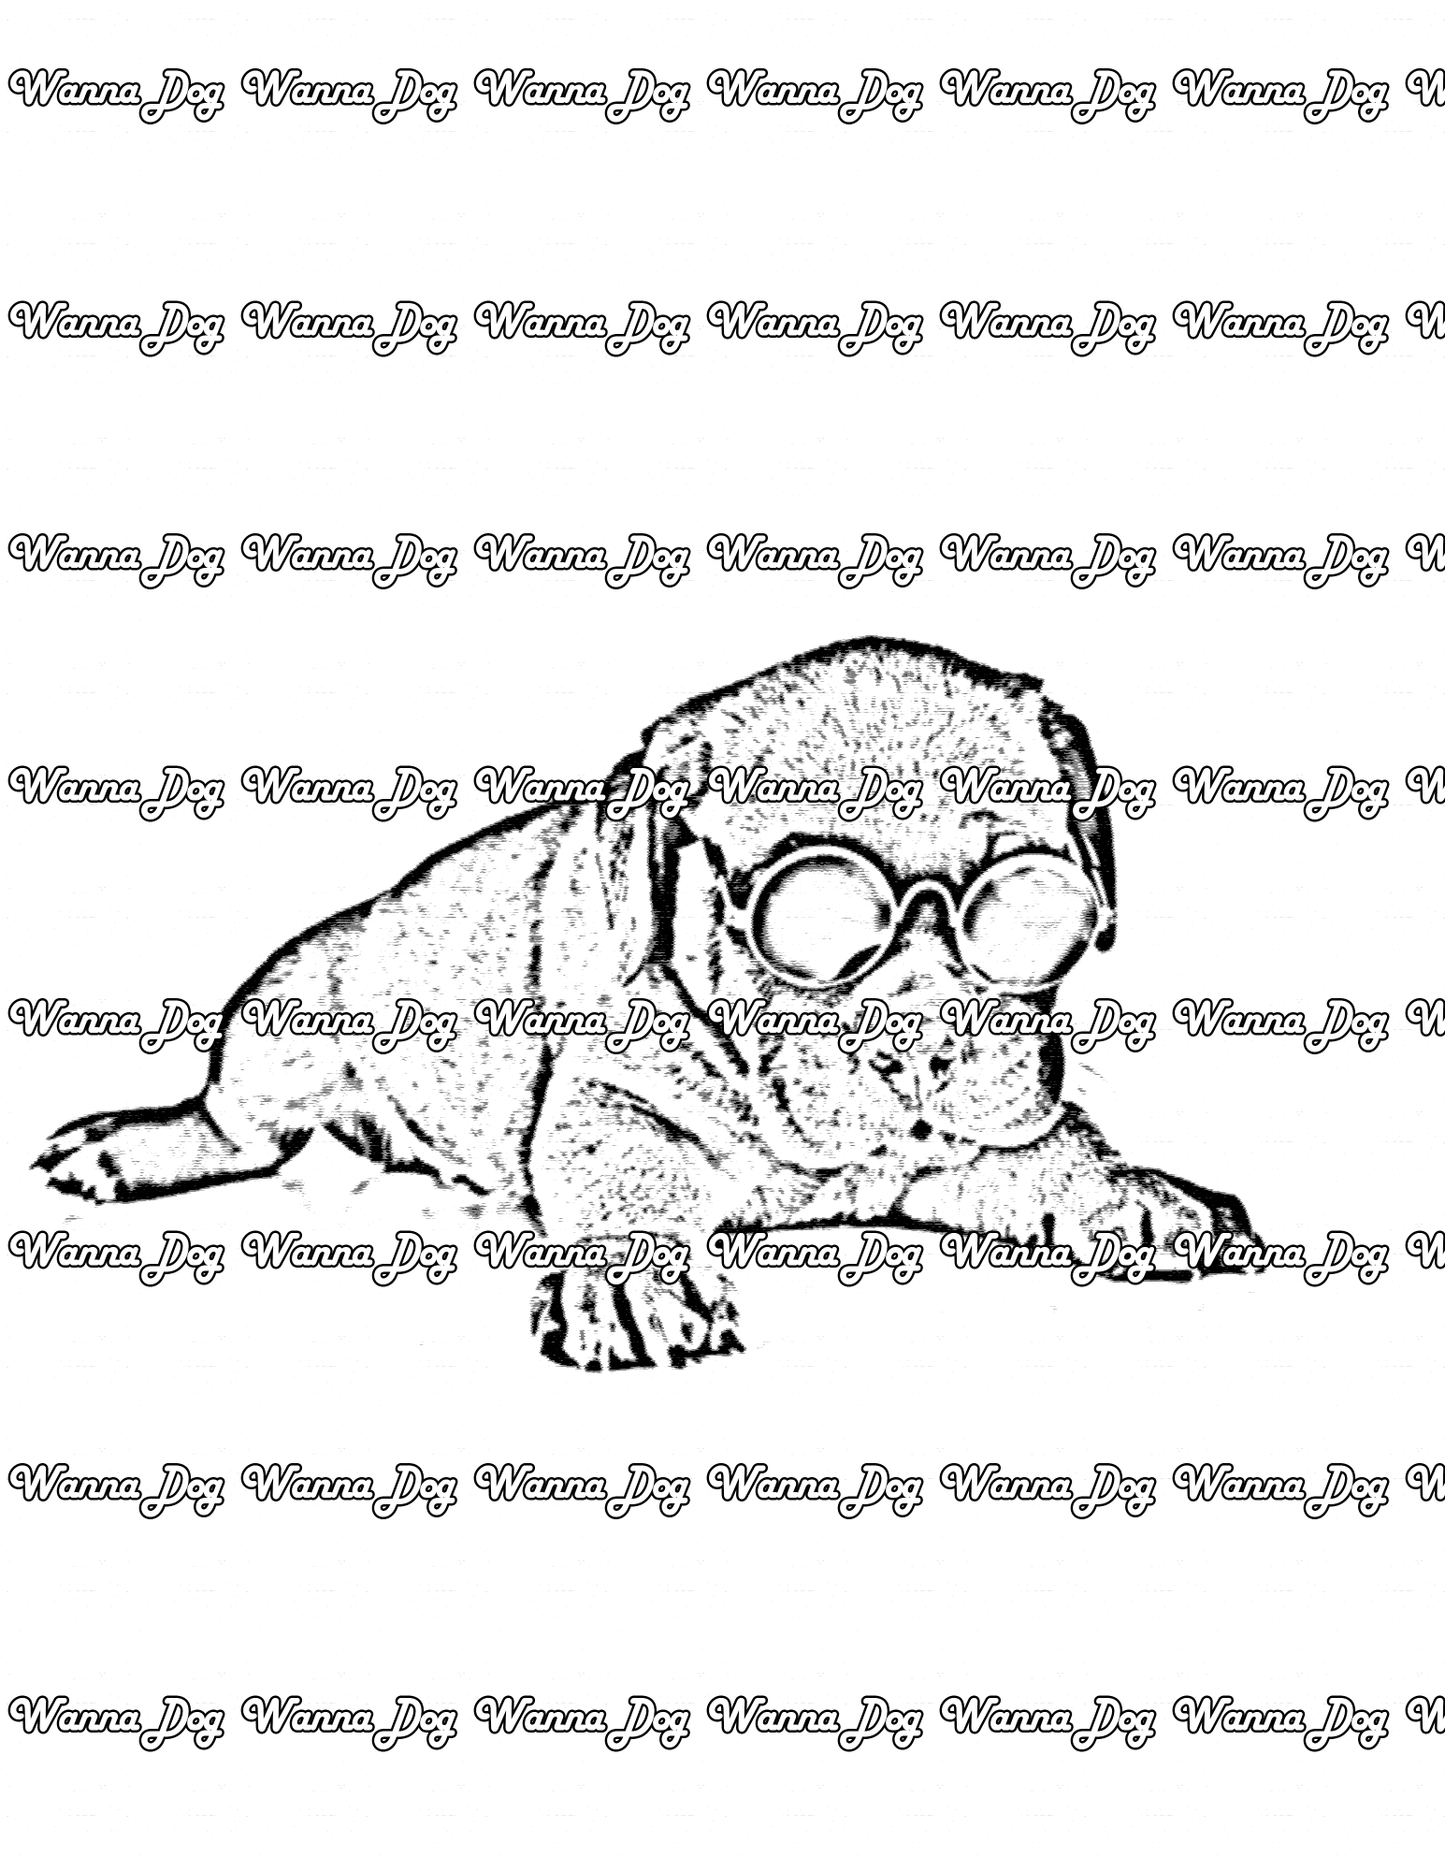 Mastiff Coloring Page of a Mastiff sitting and wearing glasses